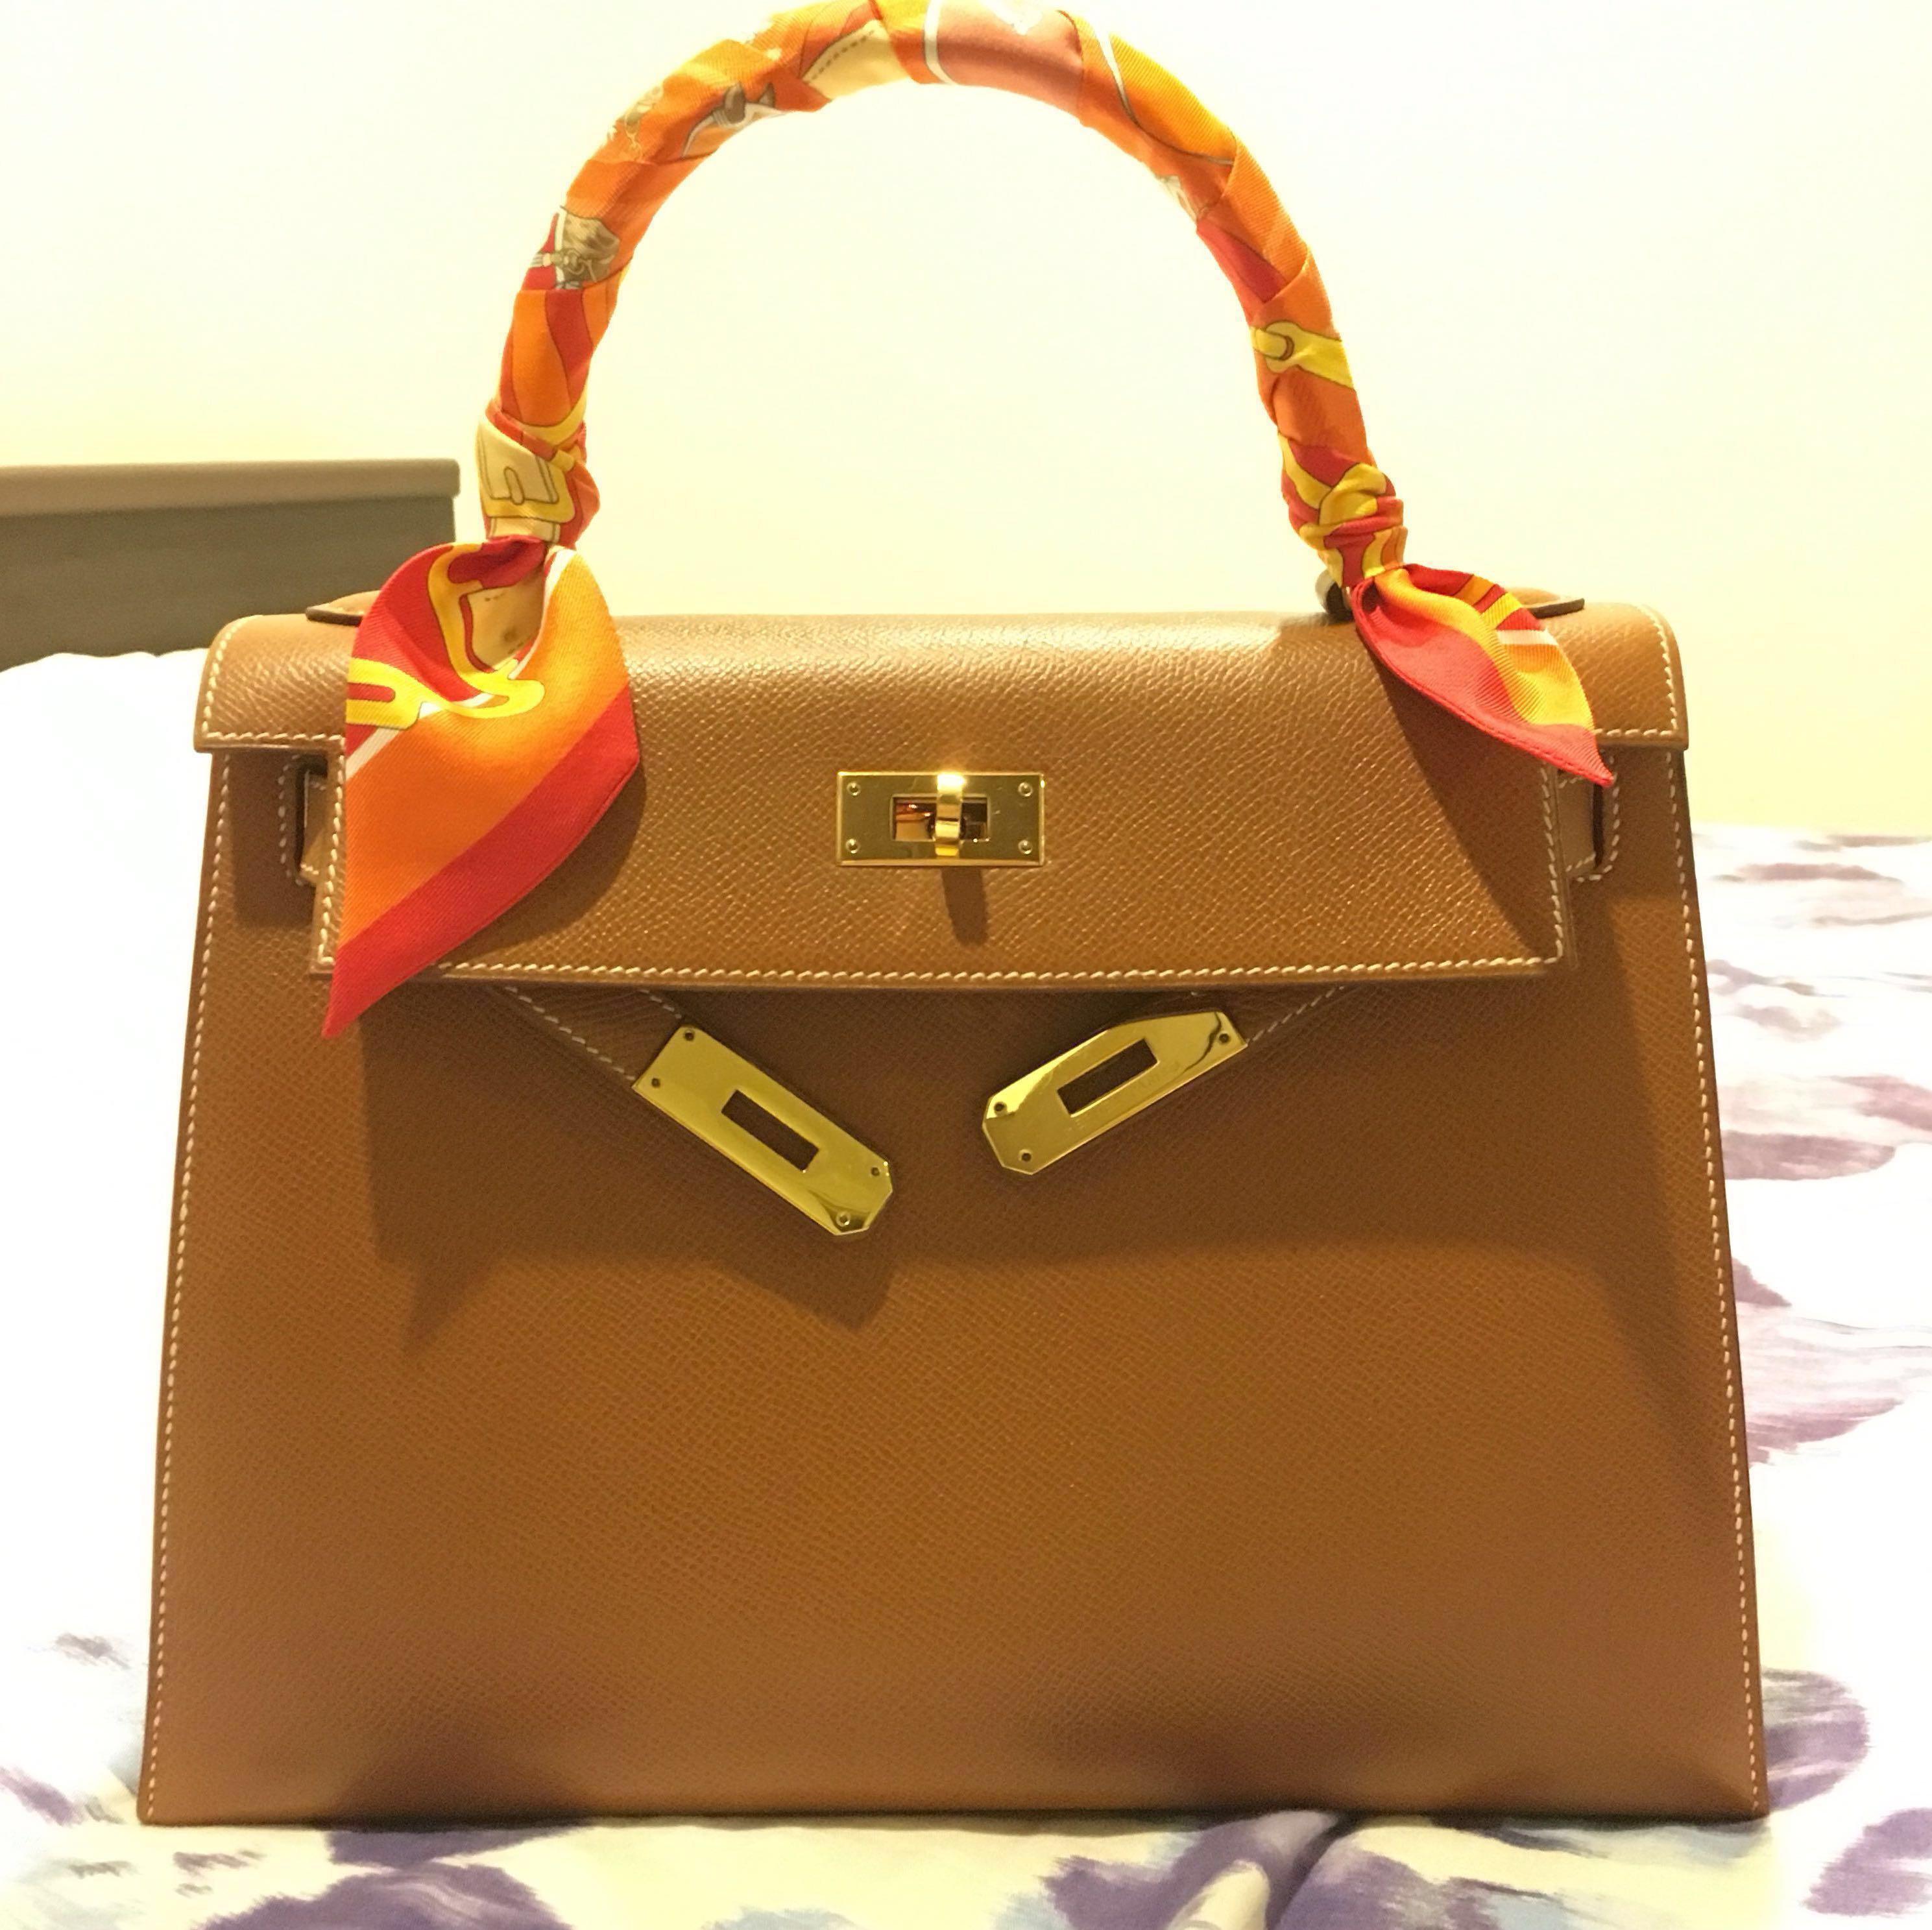 Hermes Kelly Bag Size 28 Epsom Leather in Gold Color with Silk Twilly Scarf  Petit H and Rodeo Bag Charm Stock Photo - Image of hermeslover, luxury:  113482908